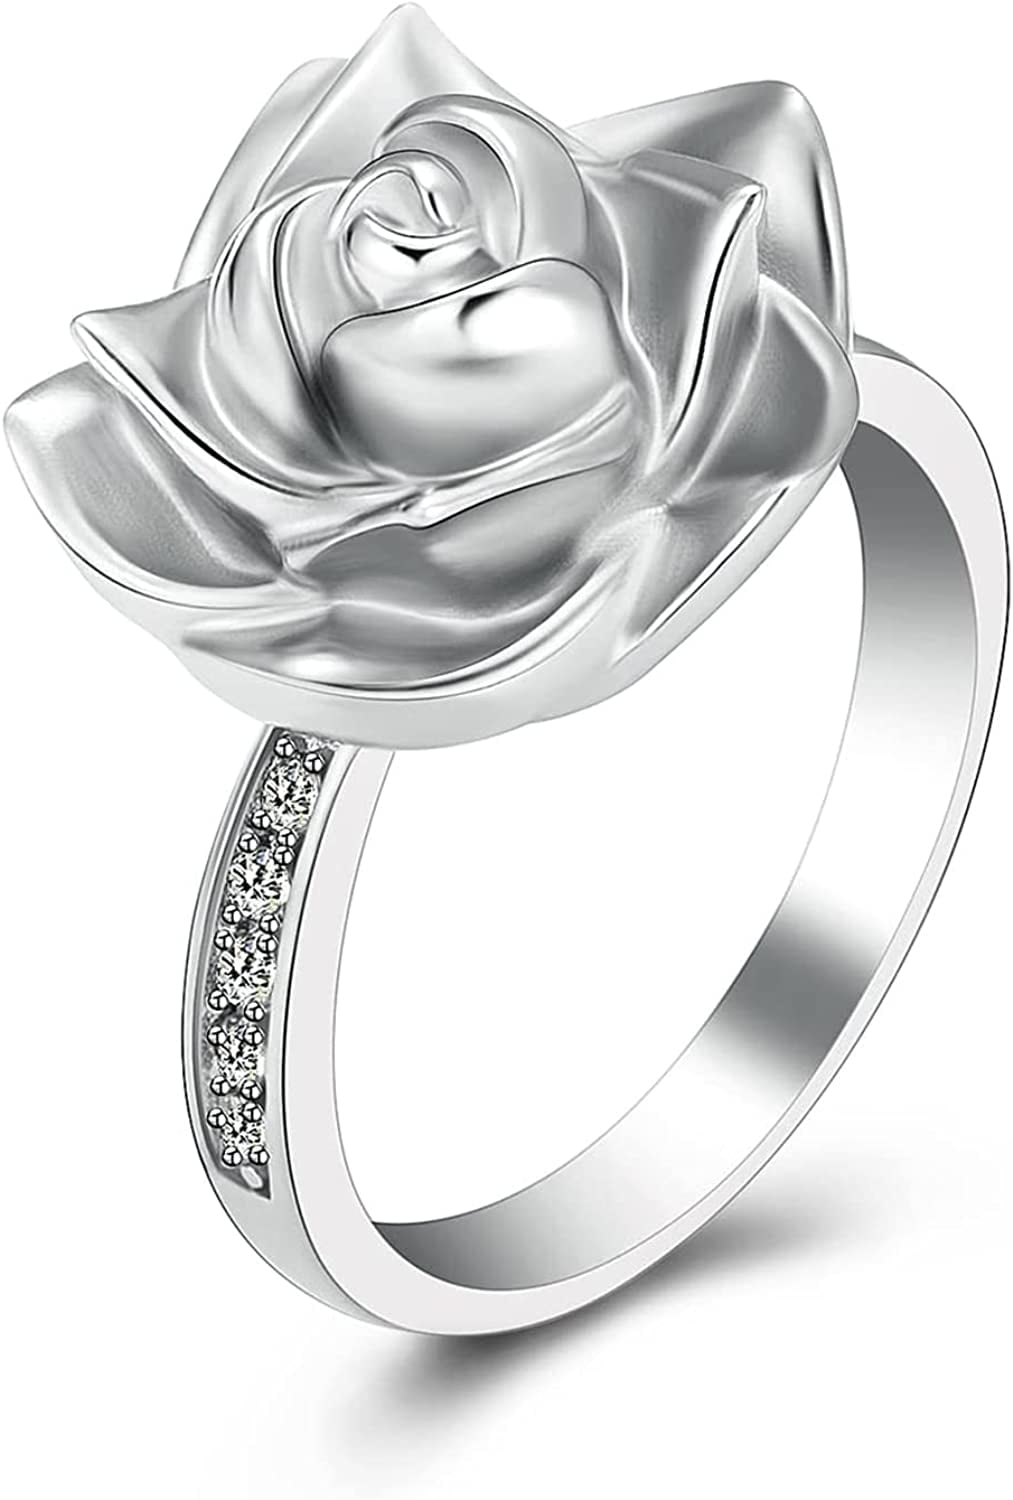 Ladies Kamiah Sterling Silver Ring For Ashes, Womens Cremation Ash